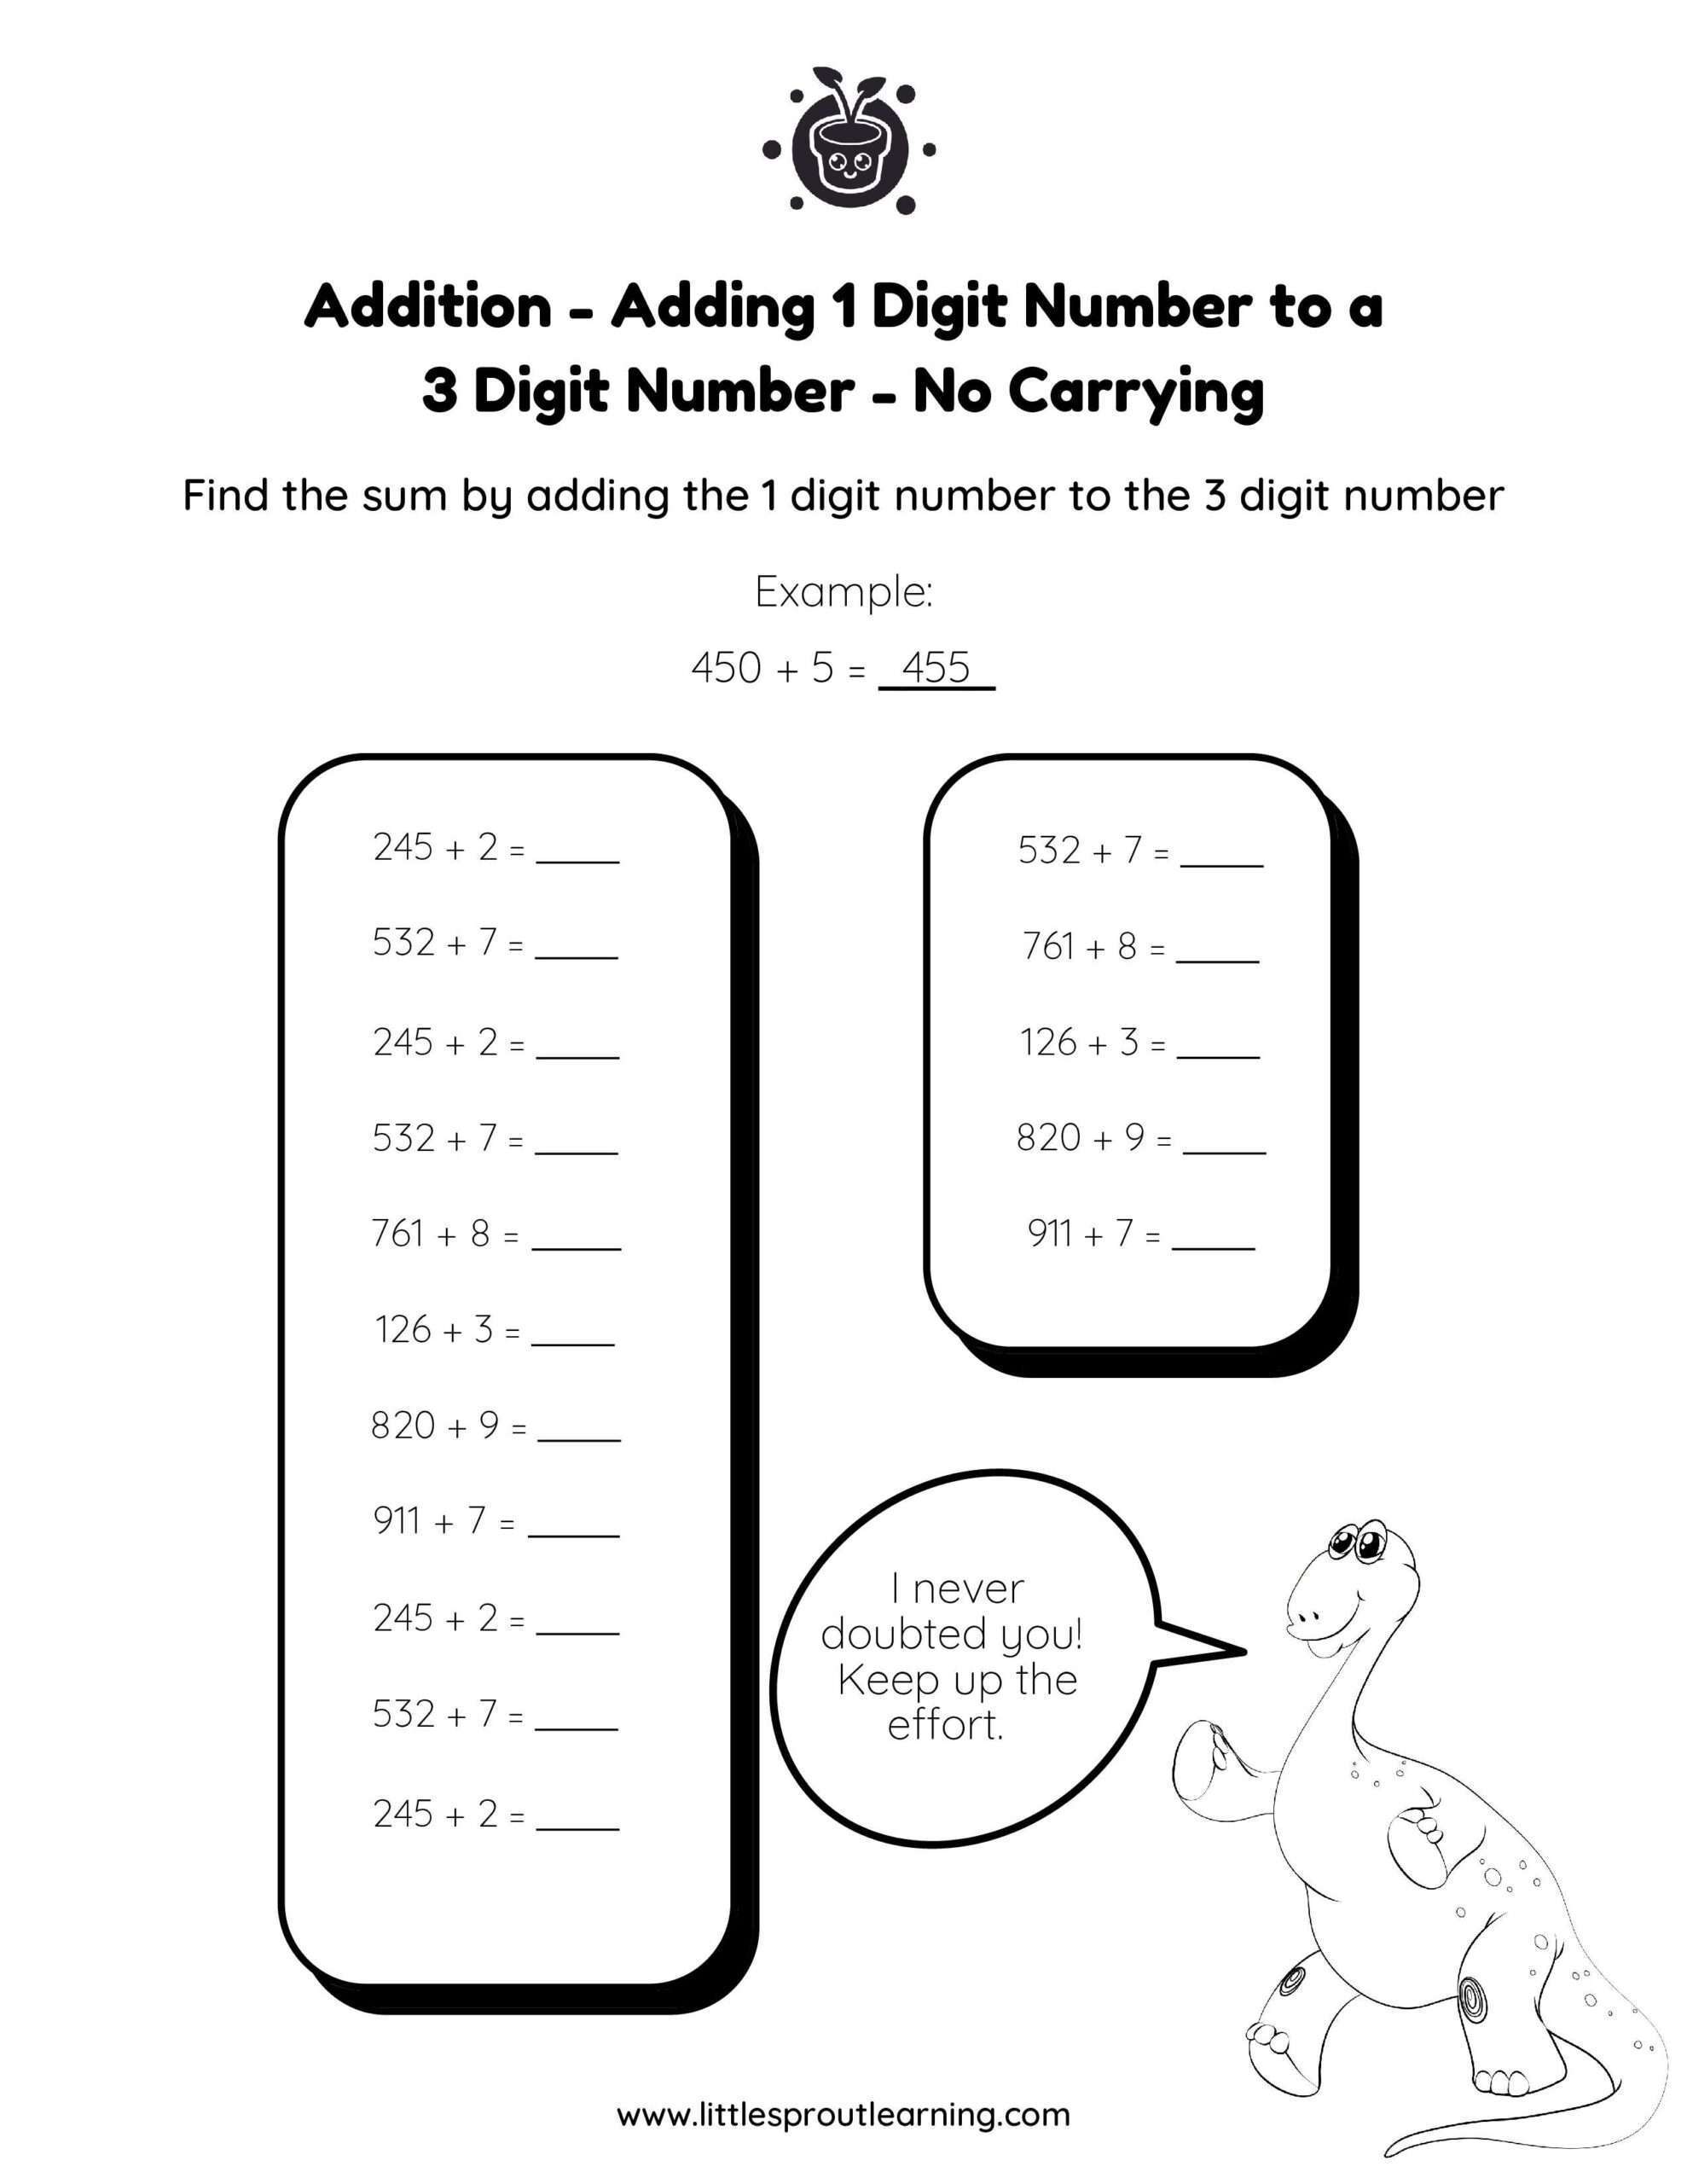 Adding Single Digit Numbers to 3 Digit Numbers (No Carrying)